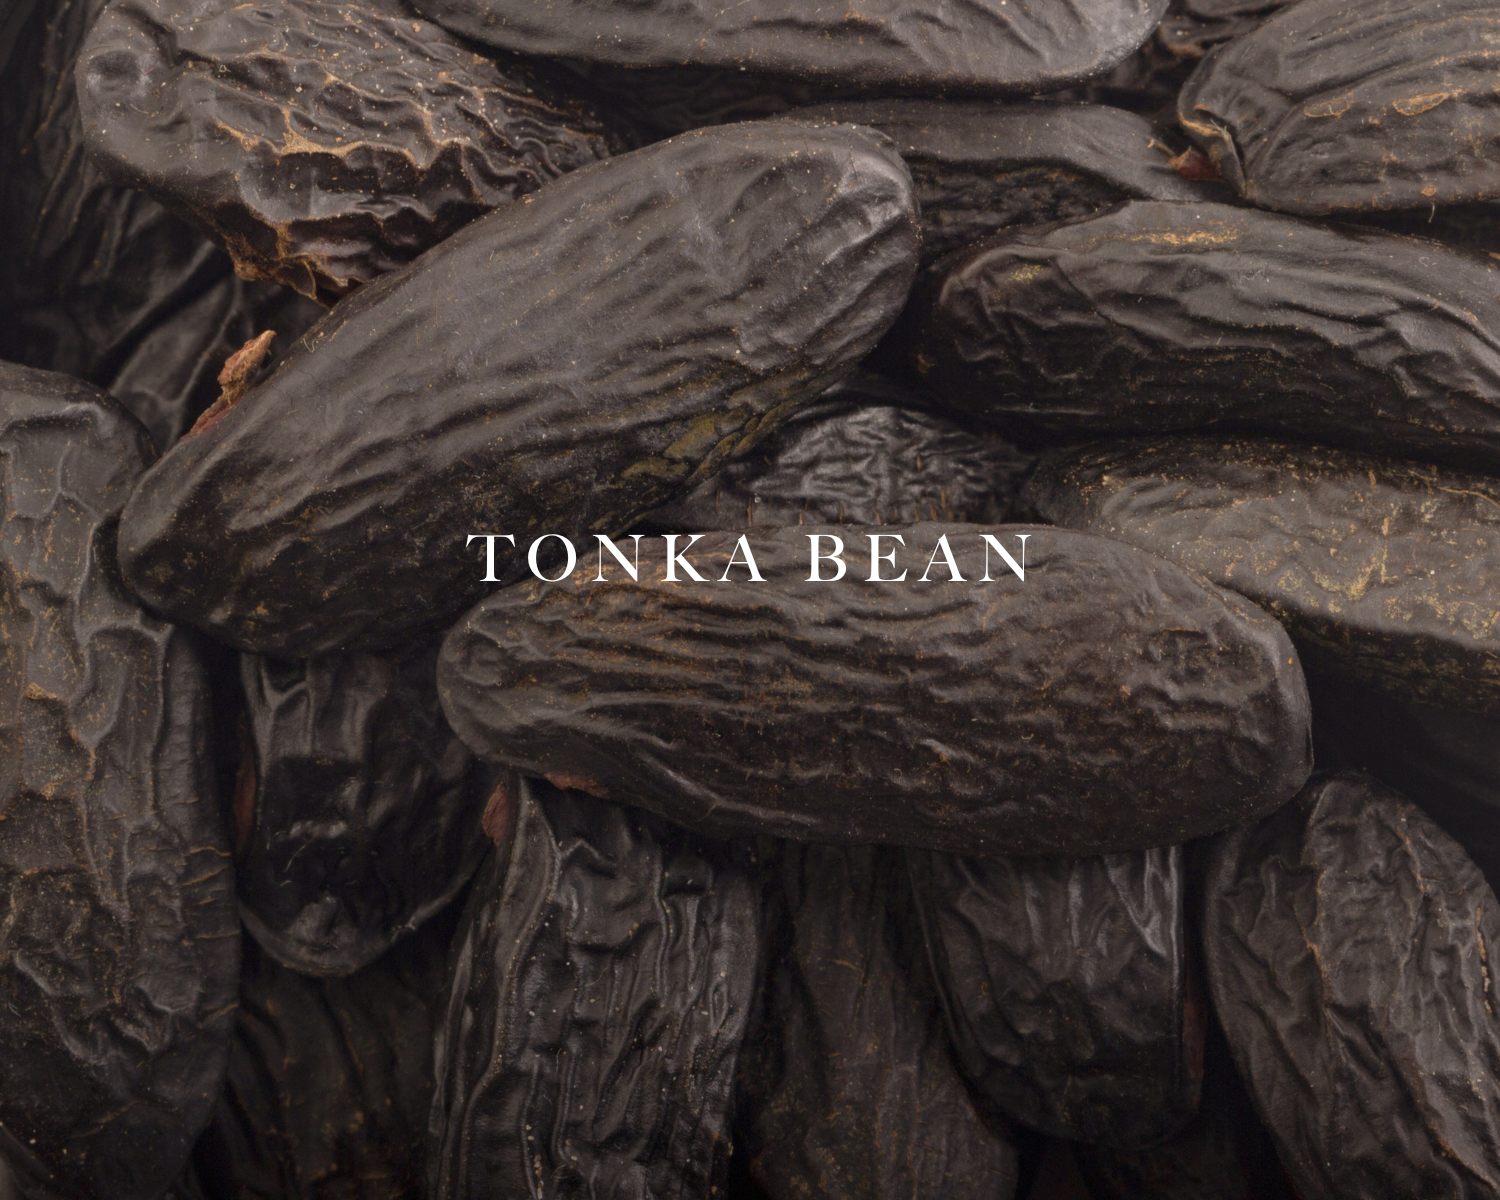 aswell-Massey Almond Eau de Toilette: image of tonka beans to represent one of the scent notes